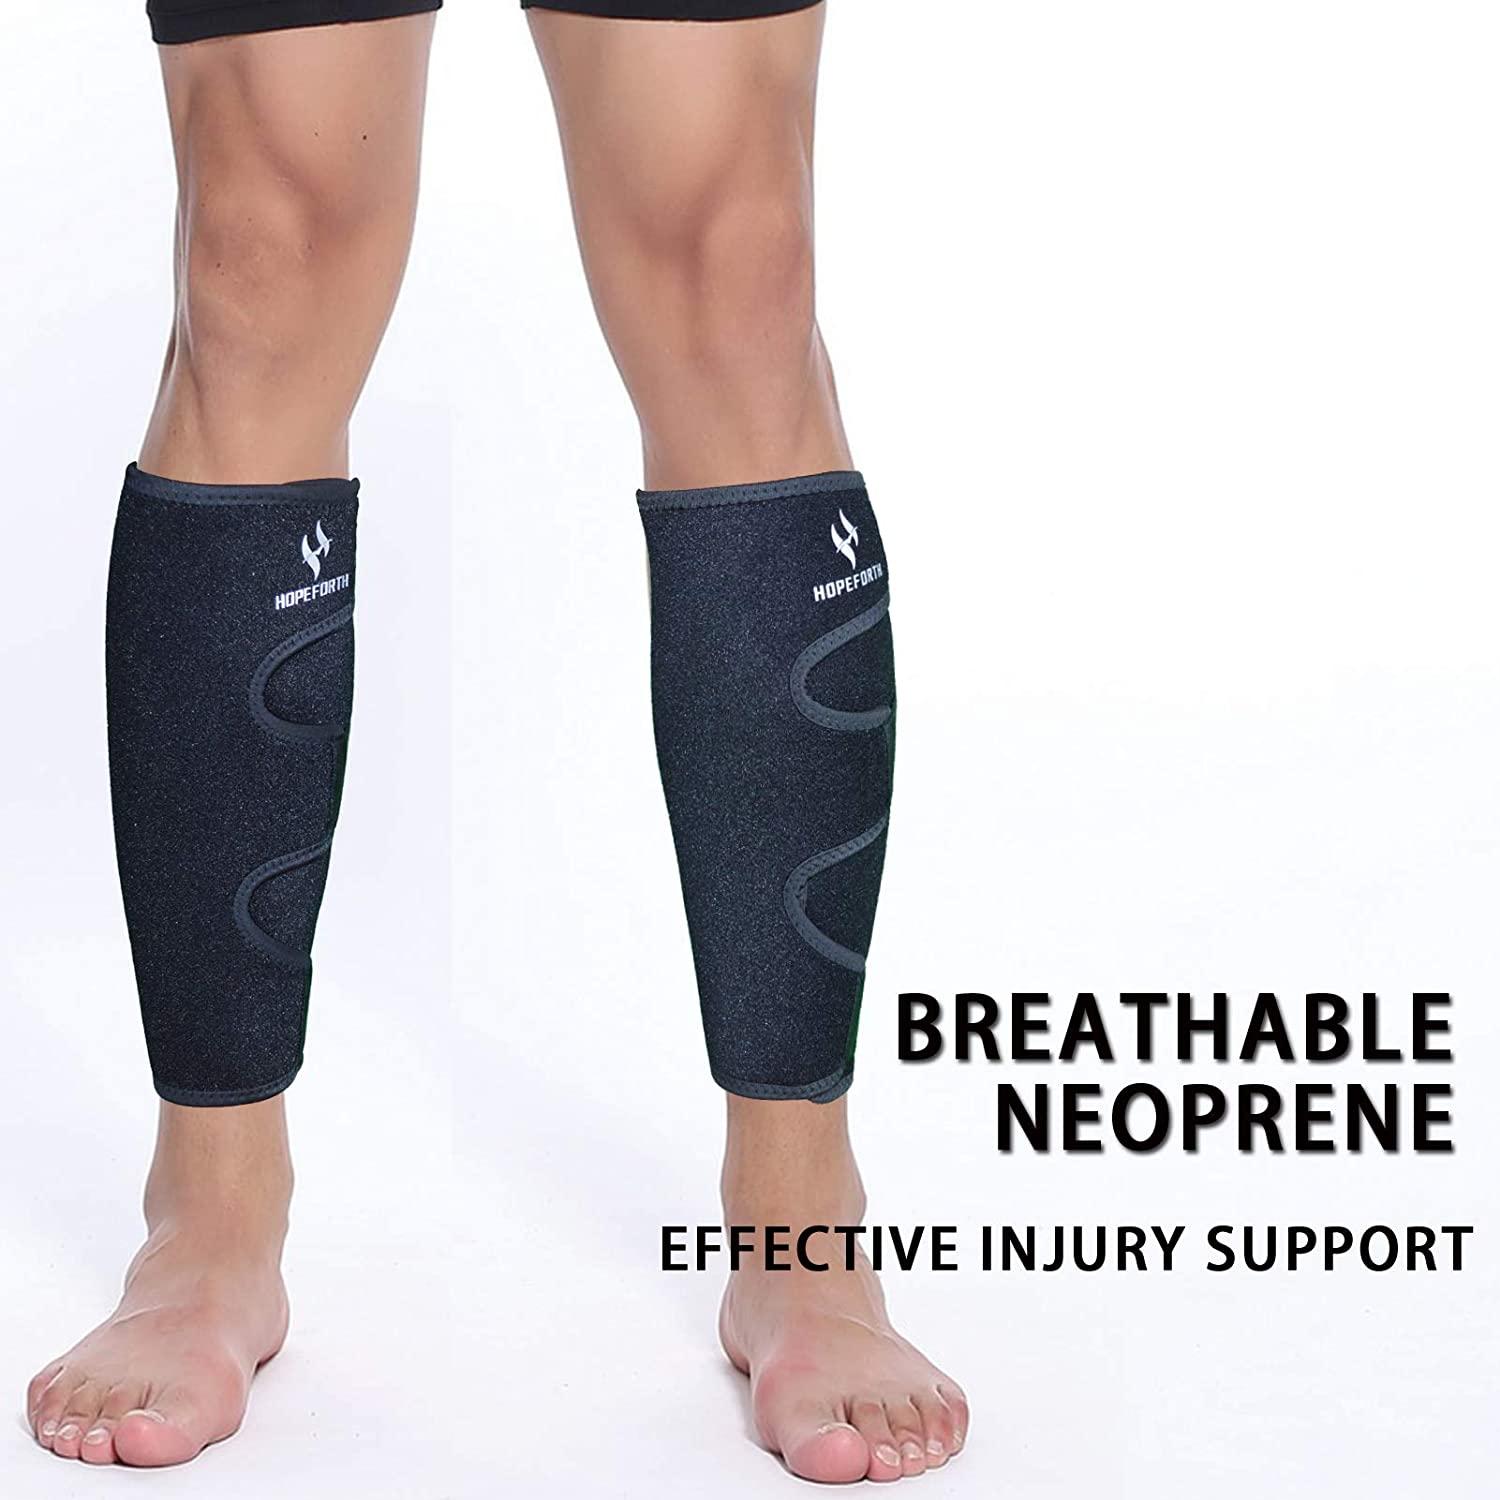 Support your shins with this versatile neoprene calf brace